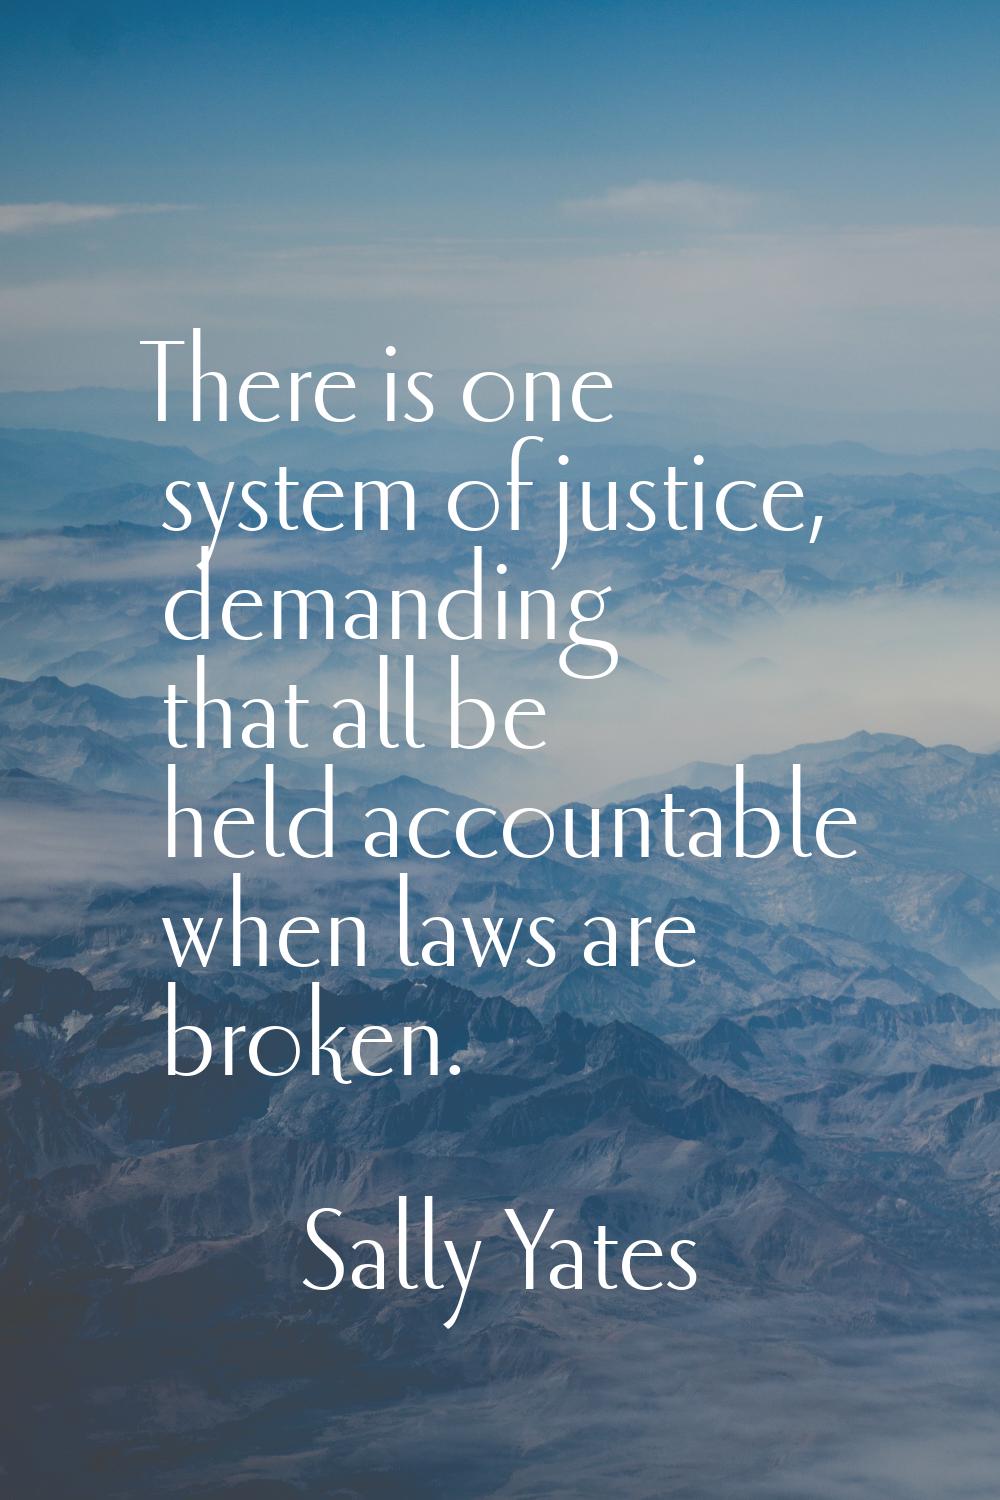 There is one system of justice, demanding that all be held accountable when laws are broken.